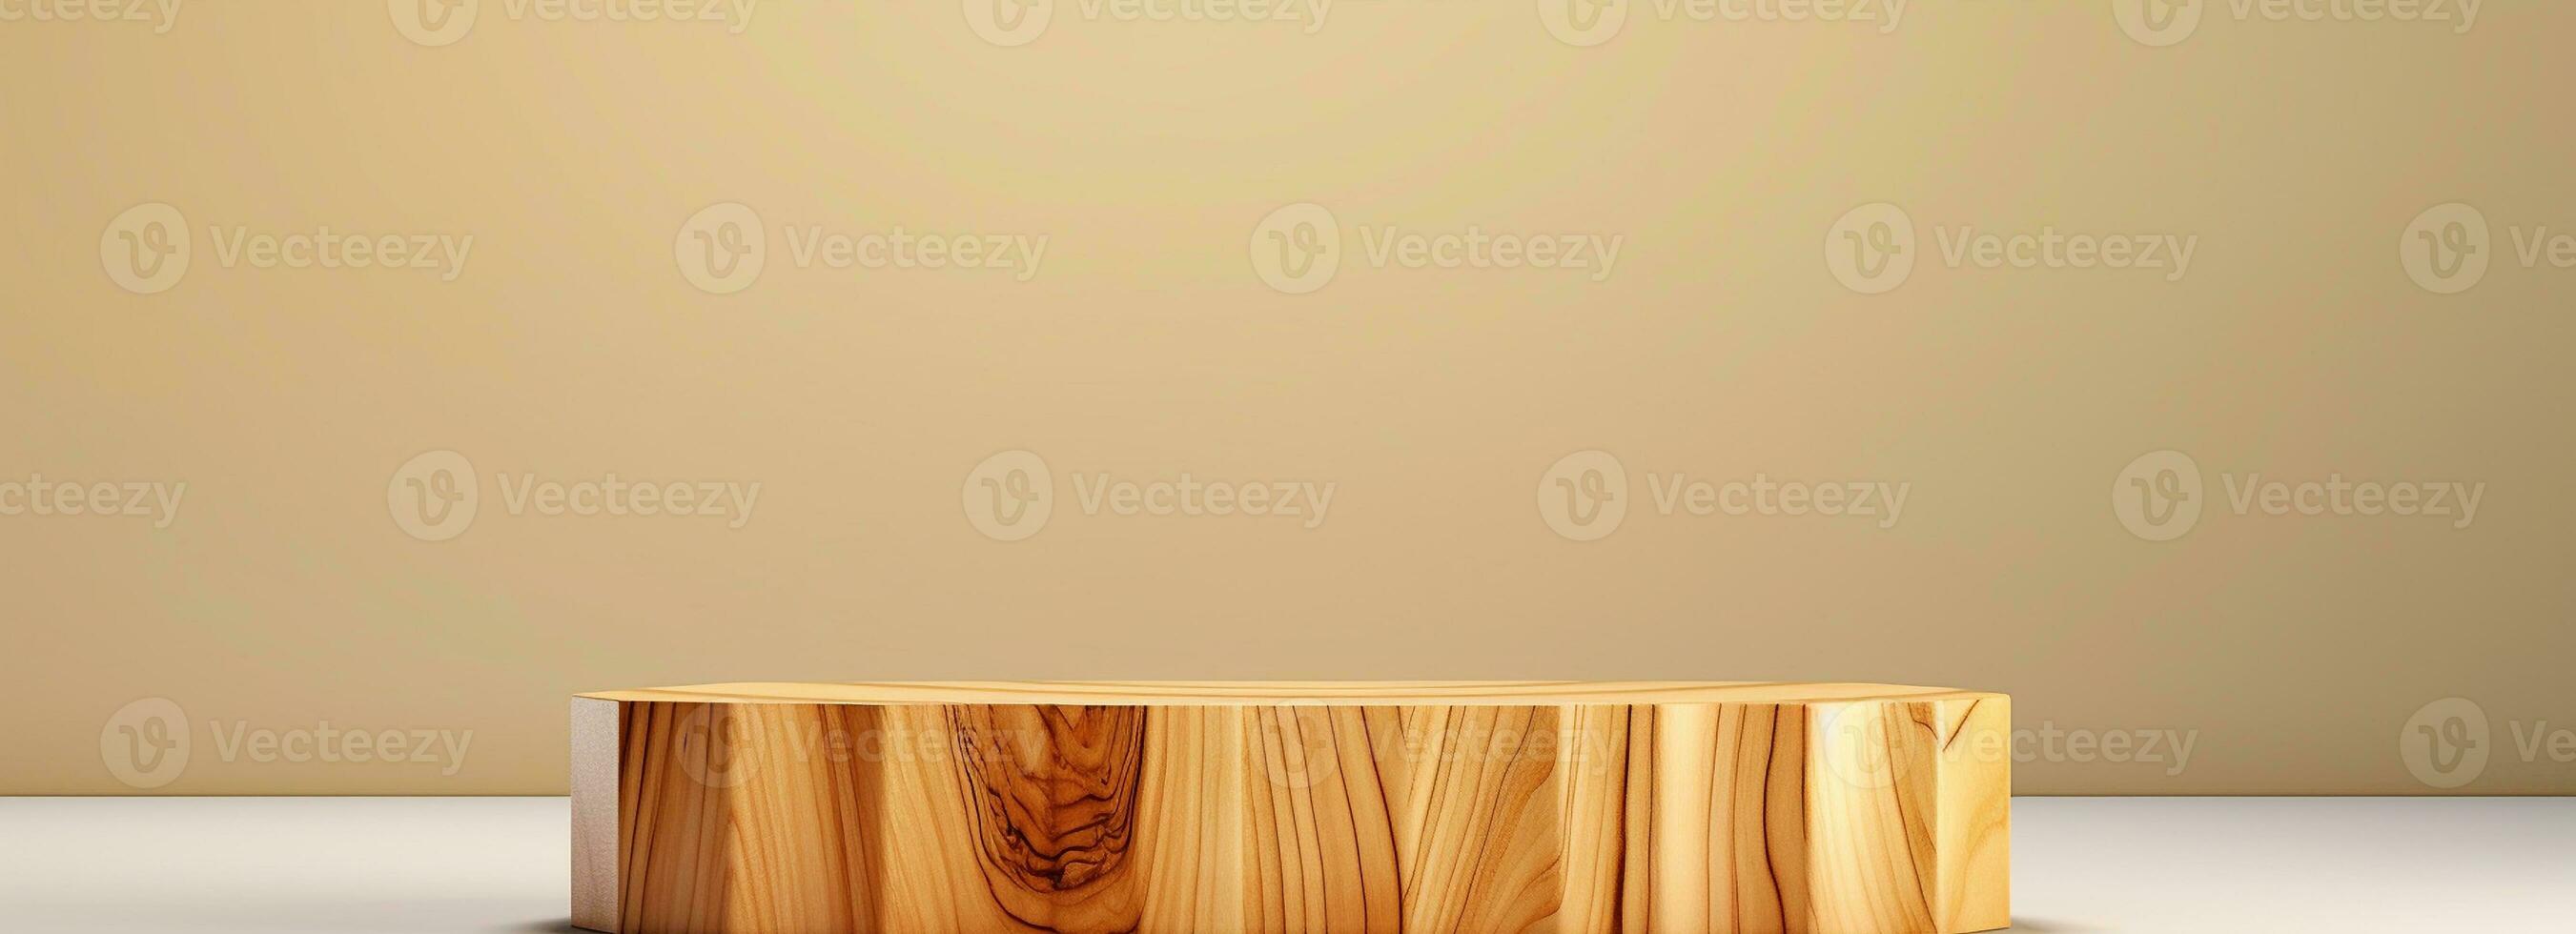 Empty wooden podium on table over modern  background. Interior mock up for design and product display photo